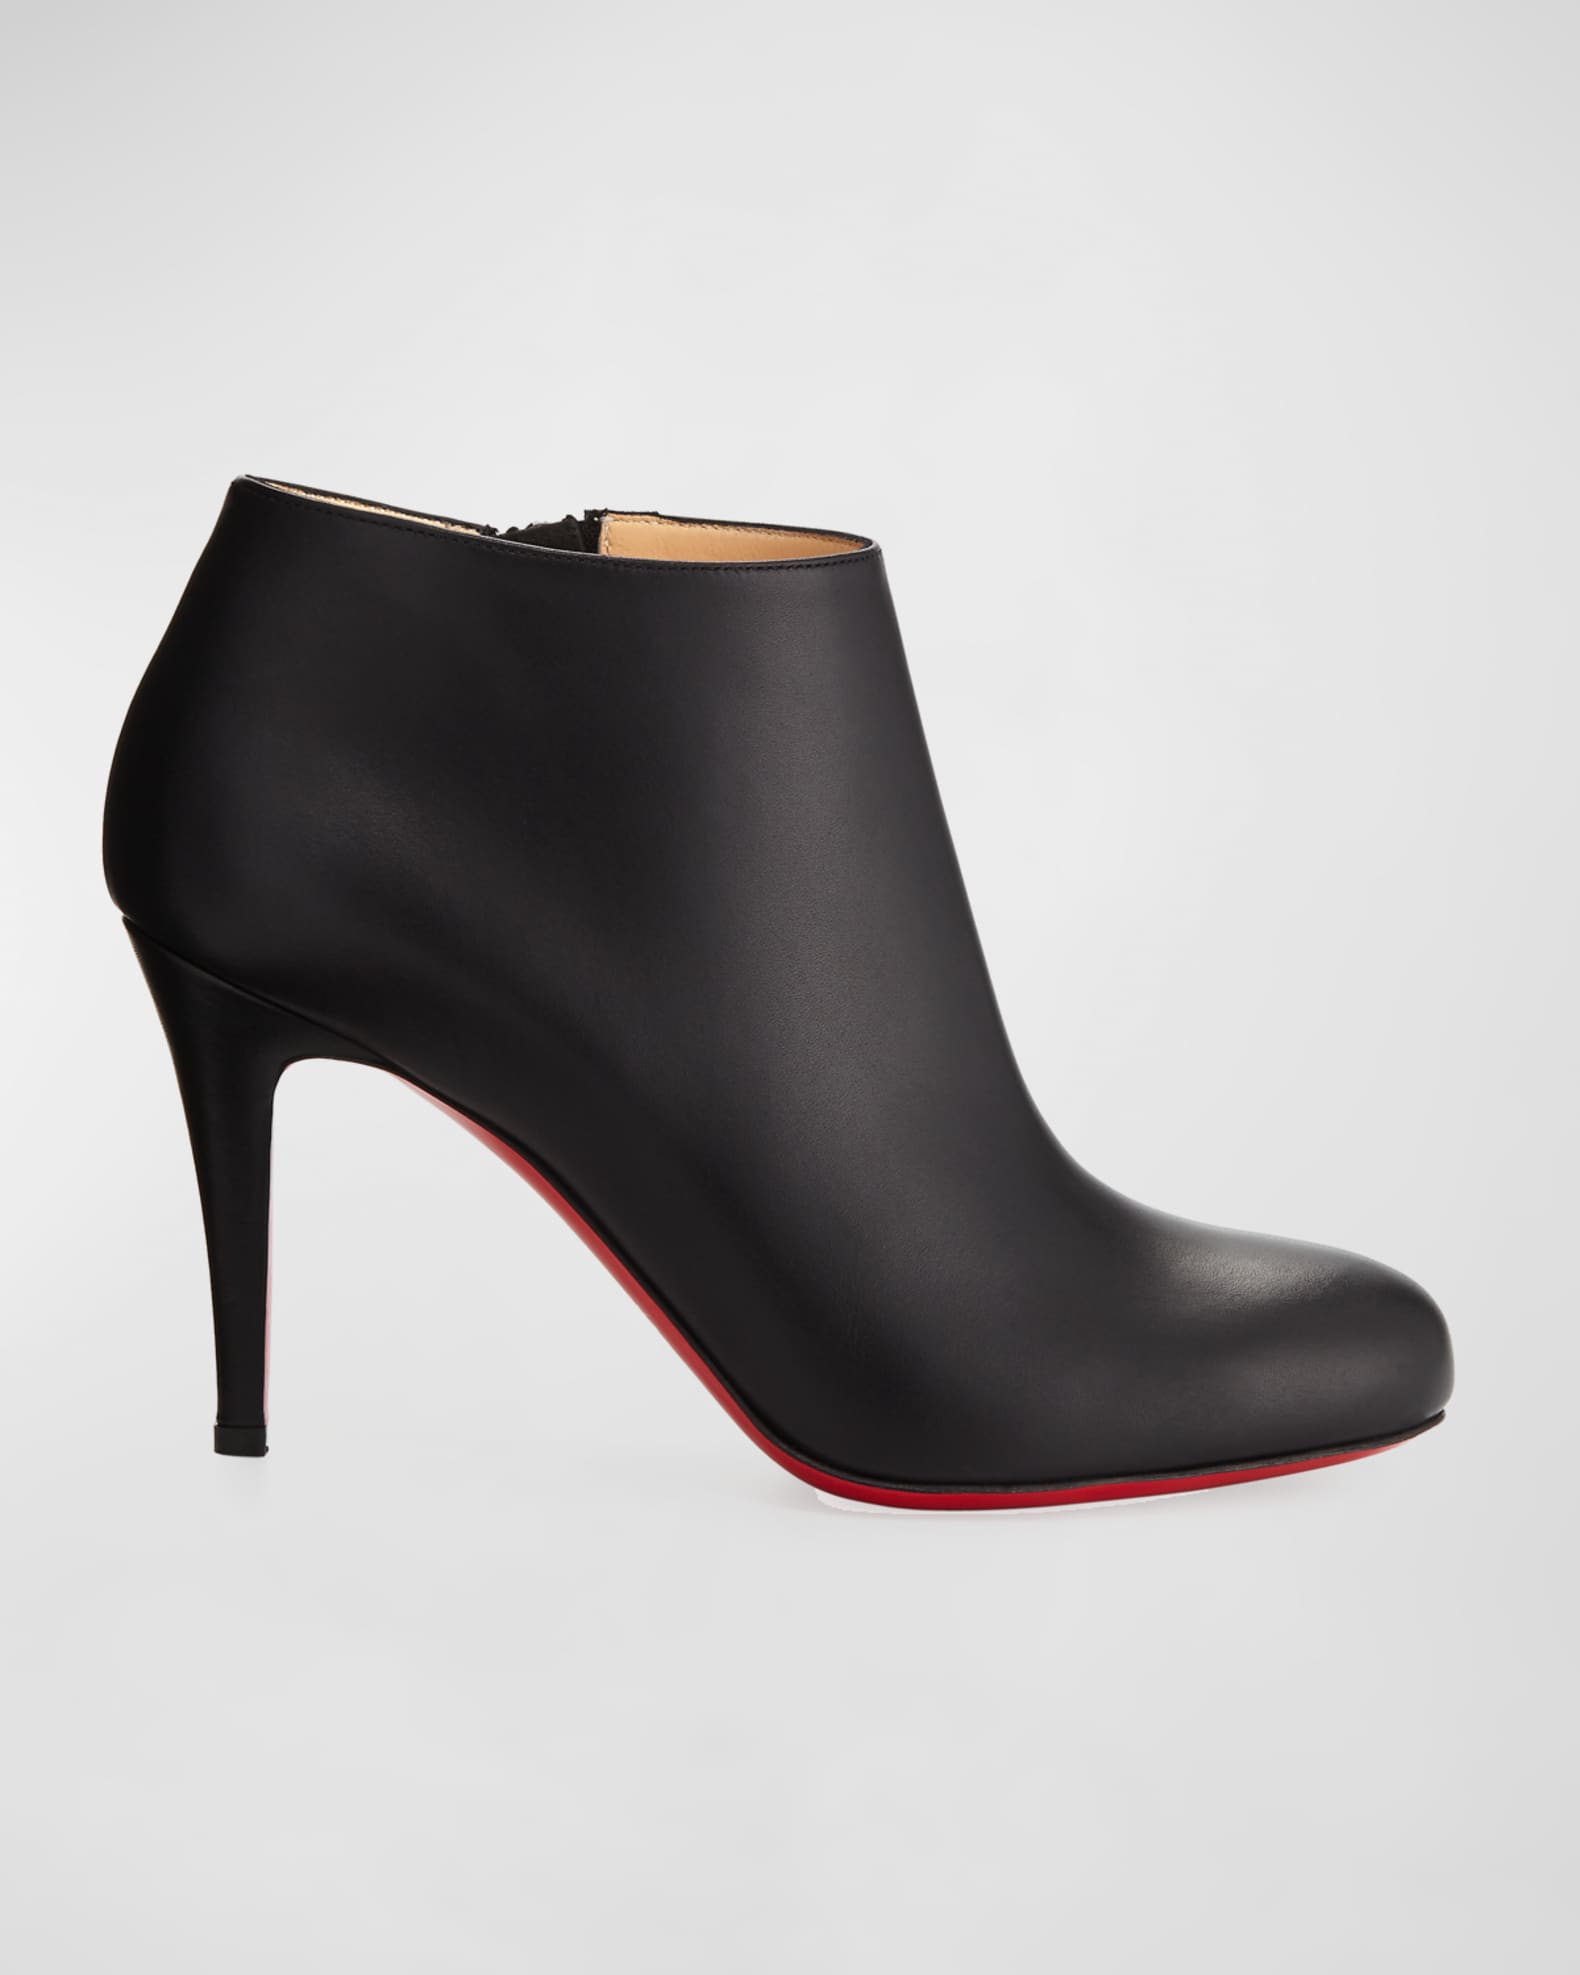 Christian Louboutin Belle Leather Red-Sole Ankle Boots | Neiman Marcus